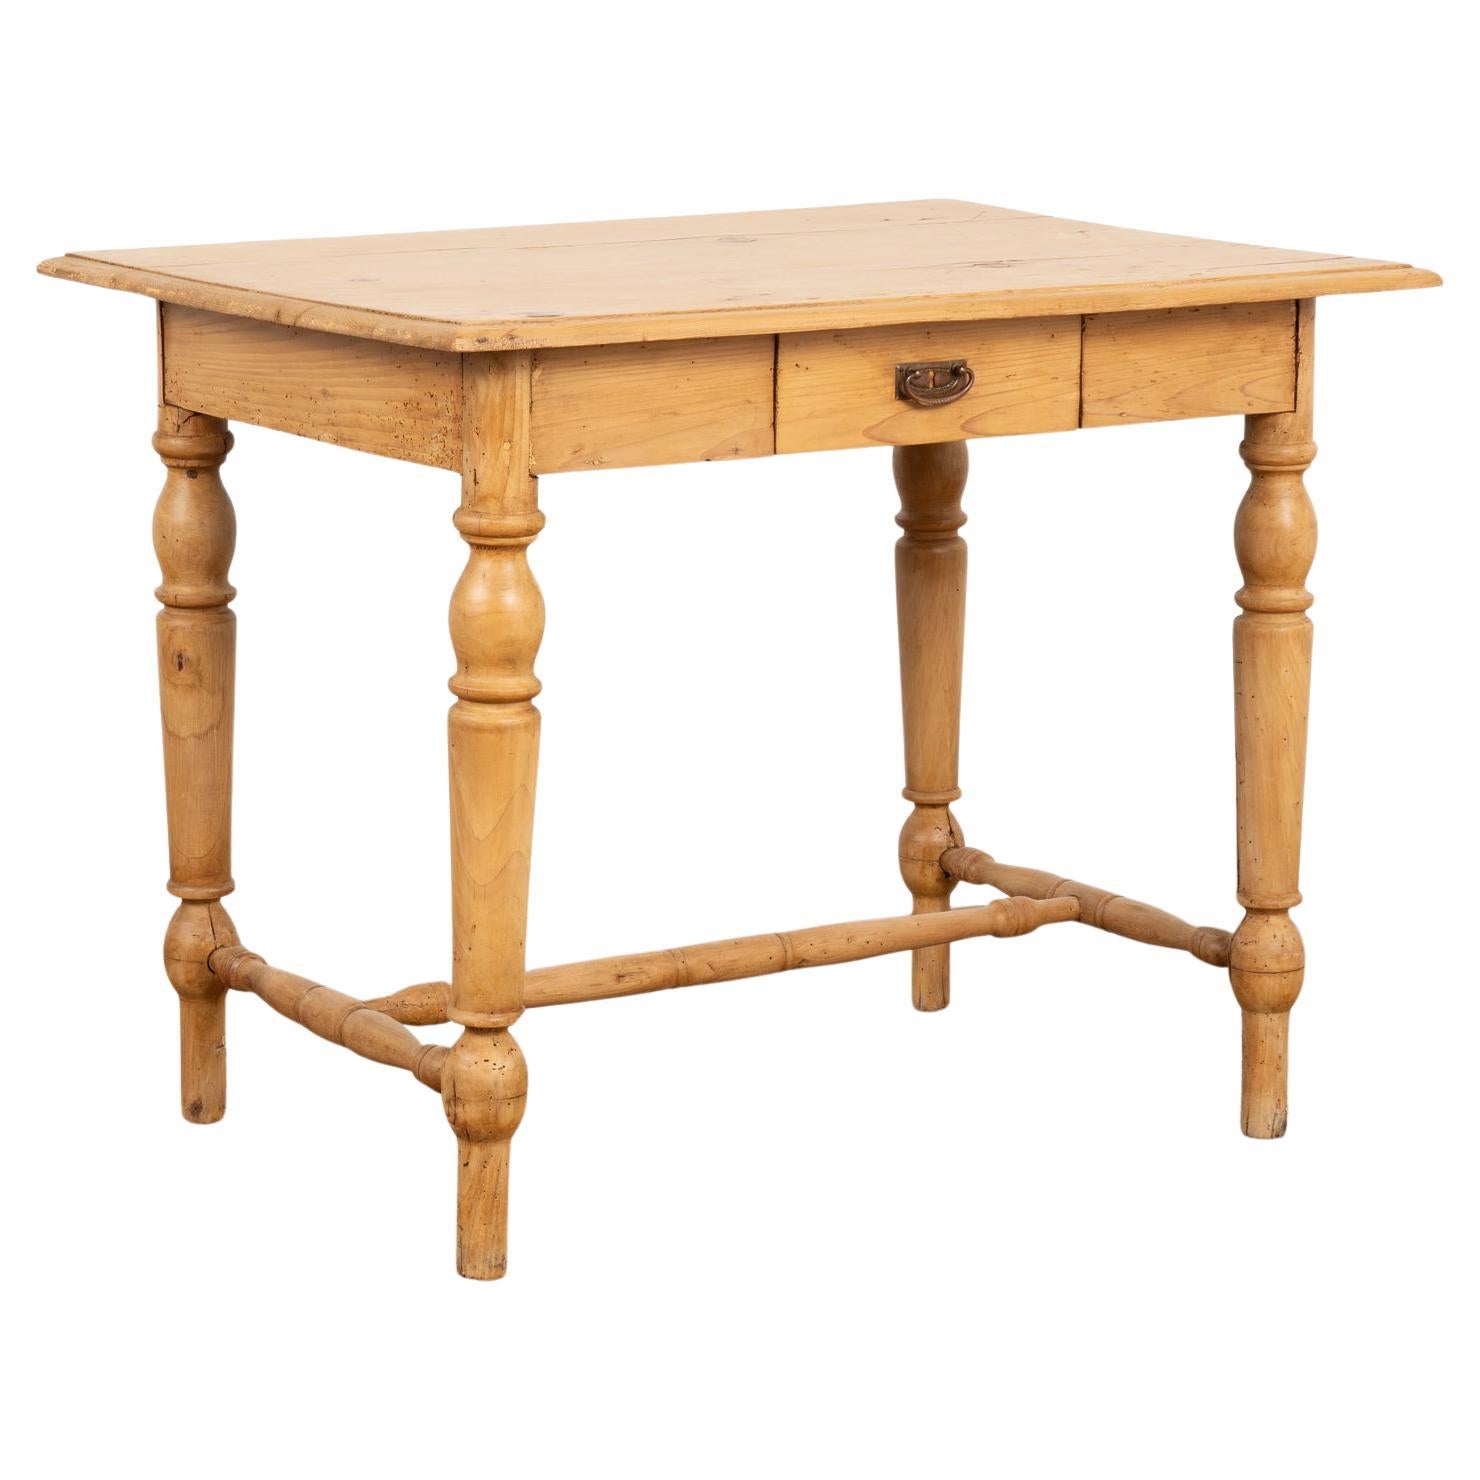 Pine Side Table With Turned Legs and Drawer, Denmark circa 1880-1900 For Sale